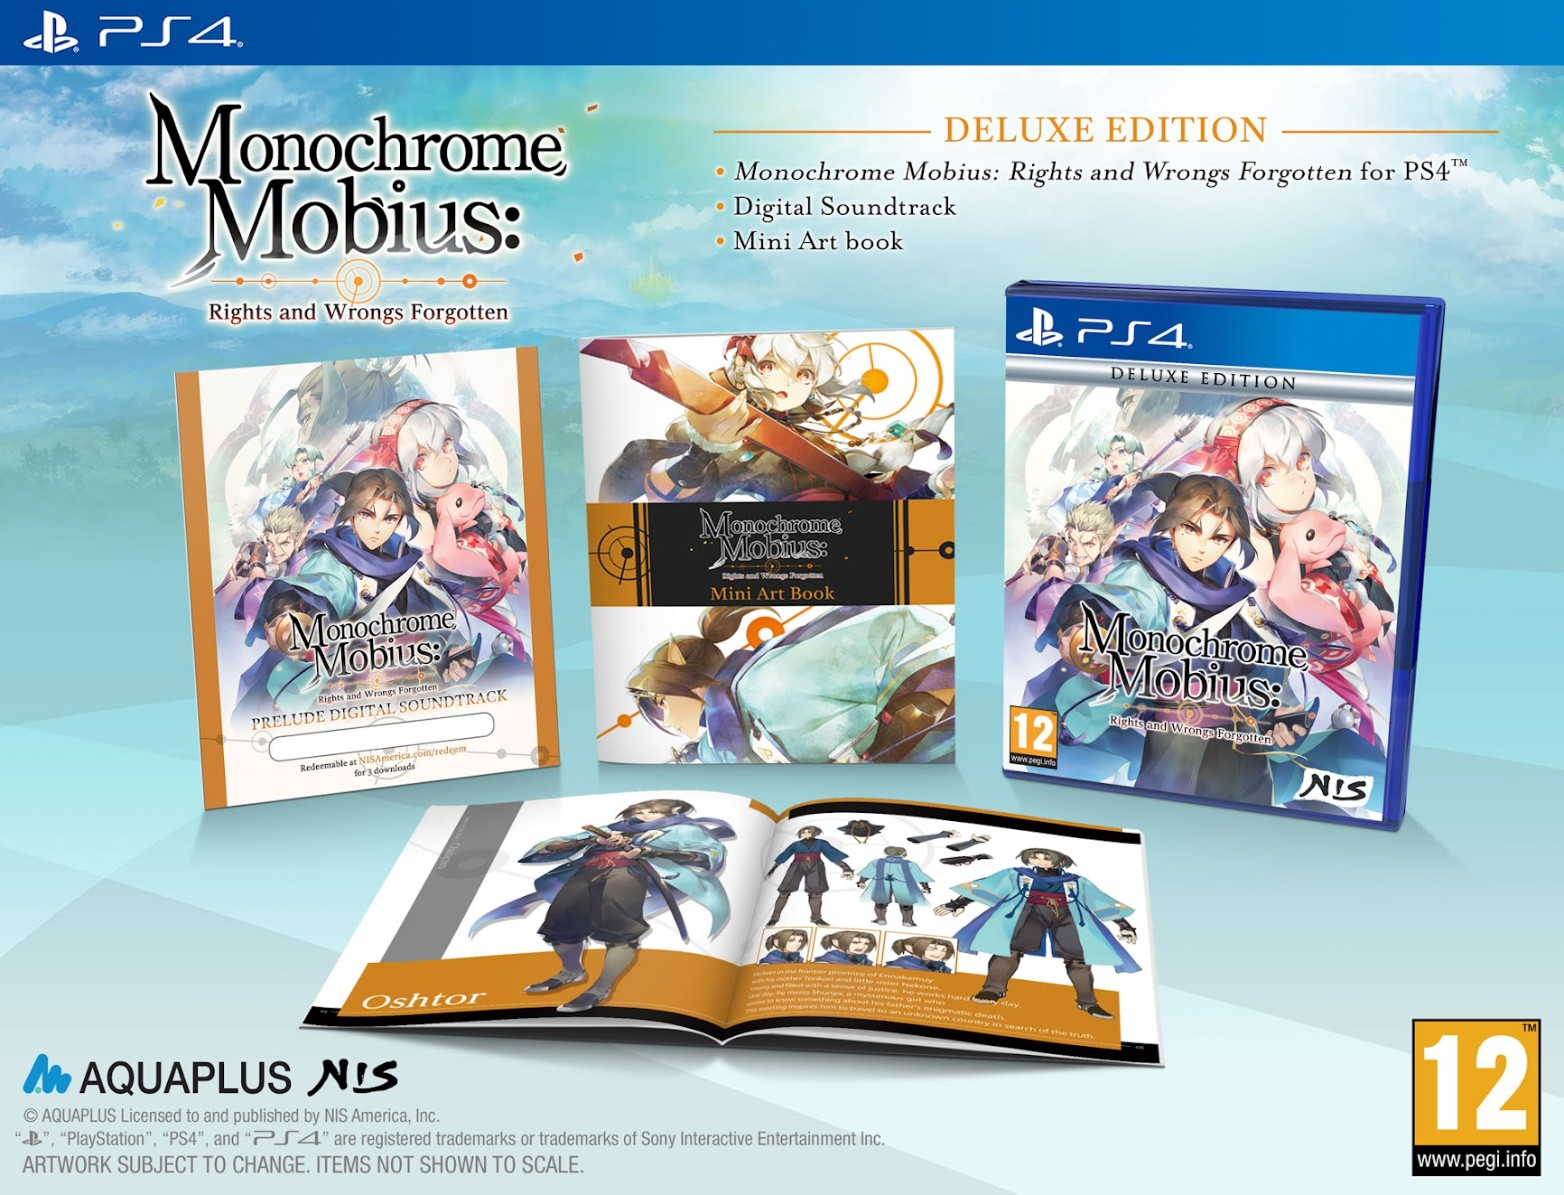 Monochrome Mobius: Rights and Wrongs Forgotten Deluxe Edition